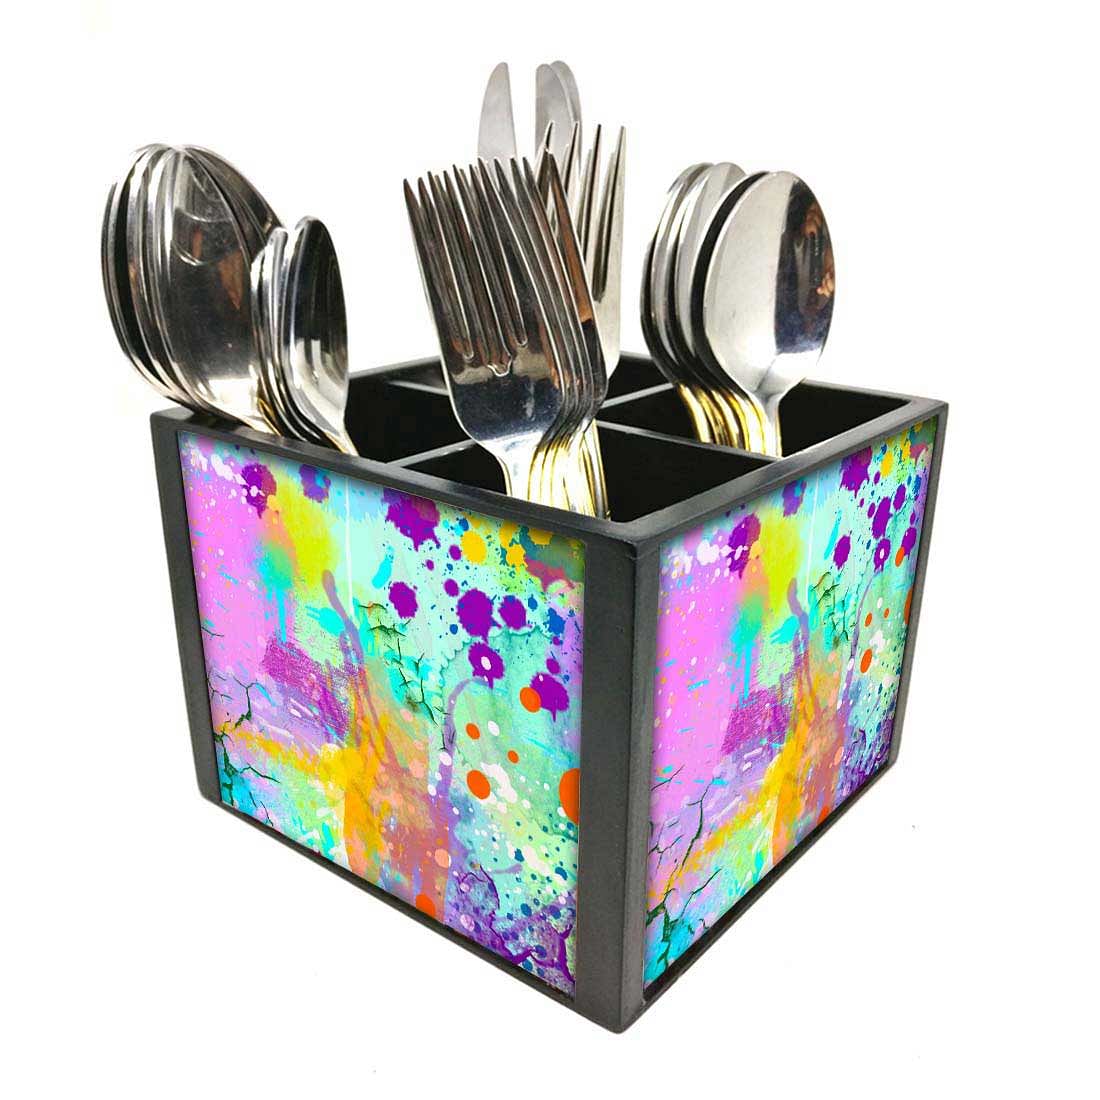 Cutlery Holder for Dining Table Spoon & Knives Organizer - Watercolor Nutcase